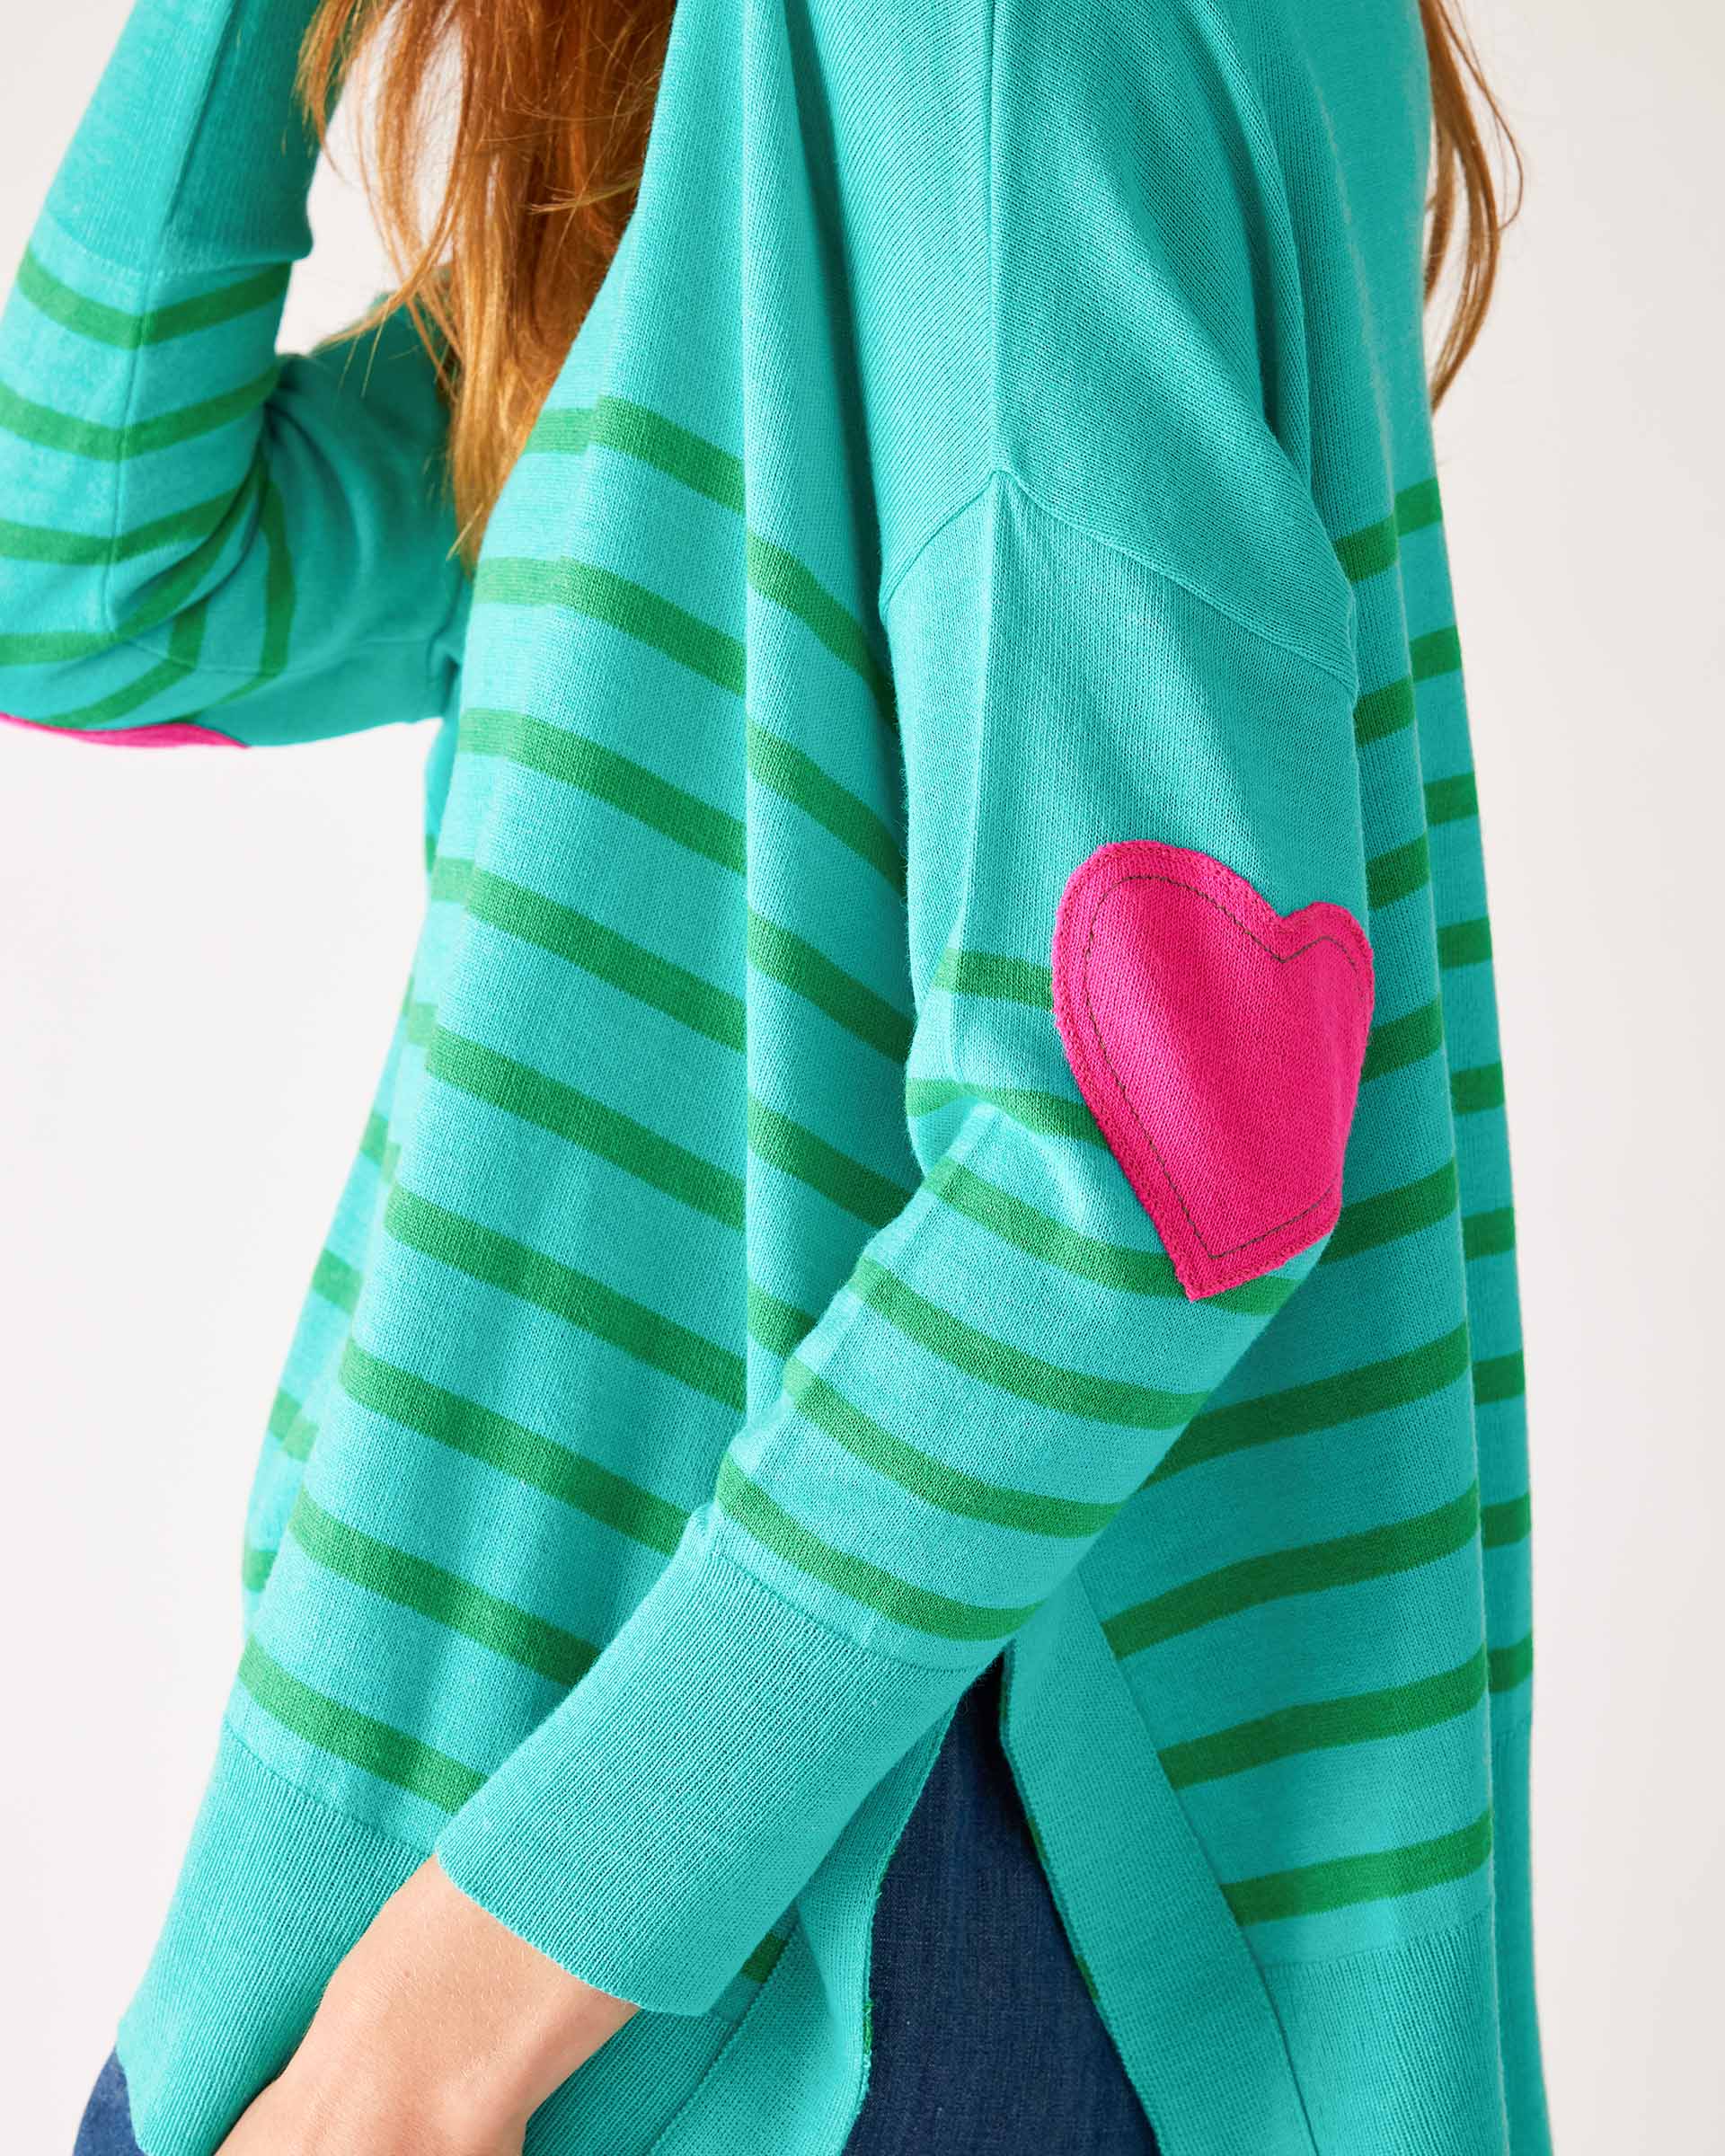 Women's One Size Green Striped Sweater with Pink Hearts on Sleeve Side View Details